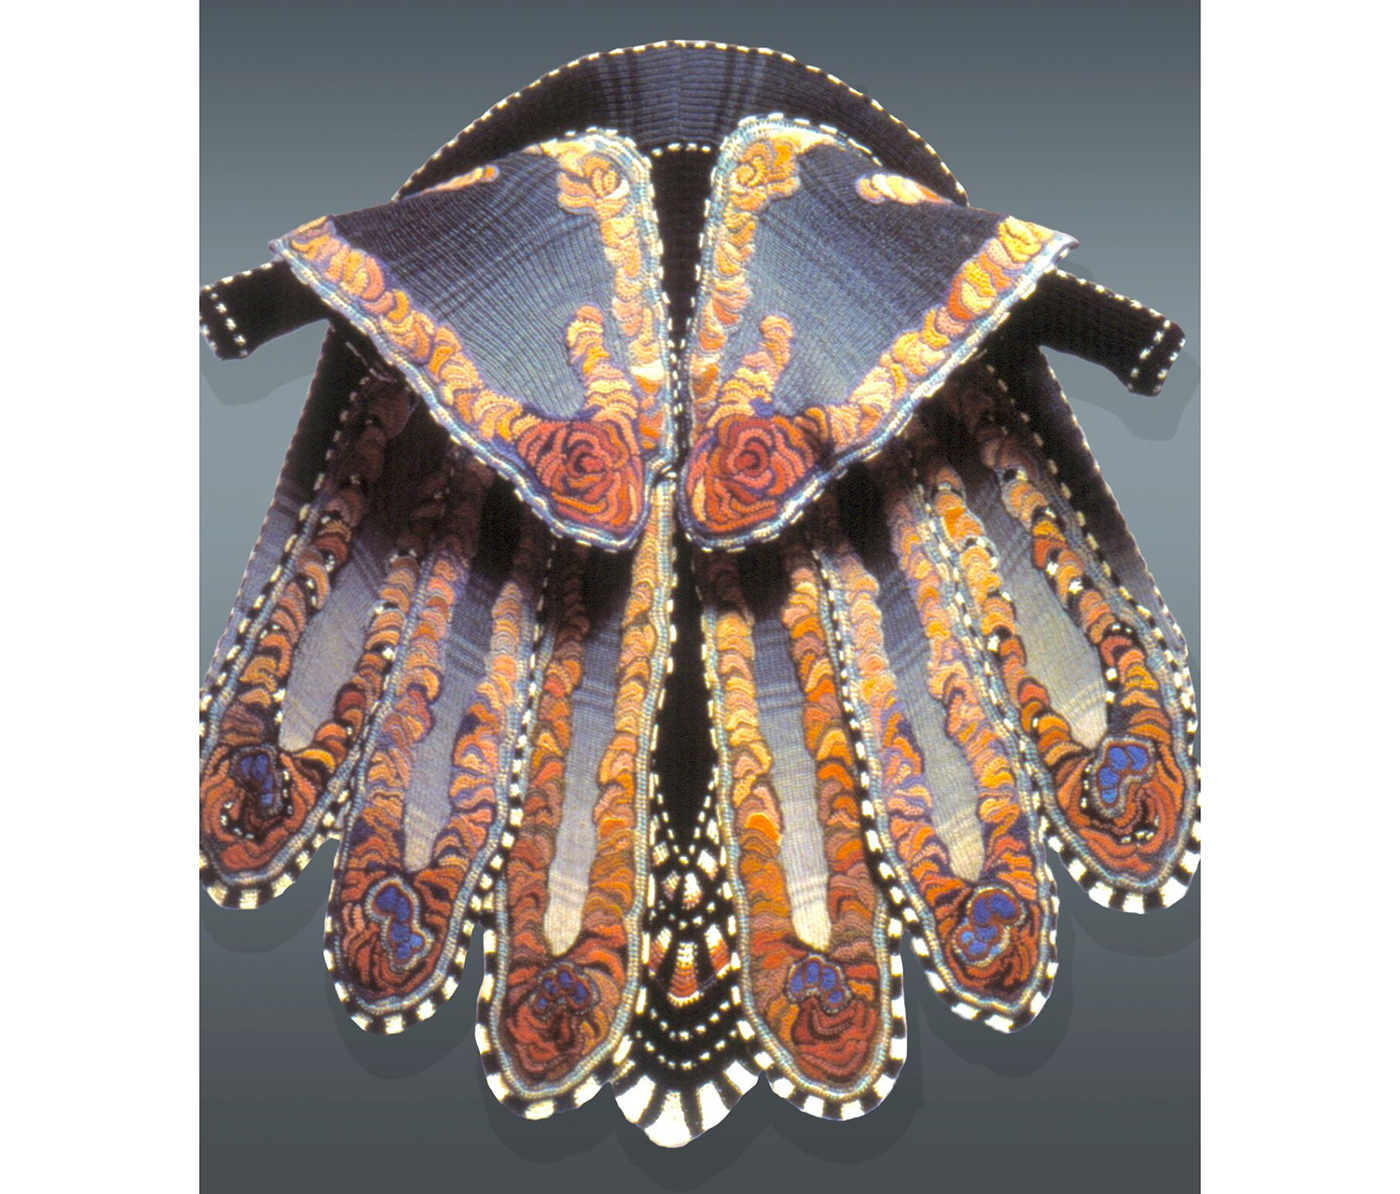 Sharron Hedges, “Morpho” (1984), crocheted and knitted rib, wool yarn, and wool jersey lining (courtesy the artist, collection Julie Schafler Dale)